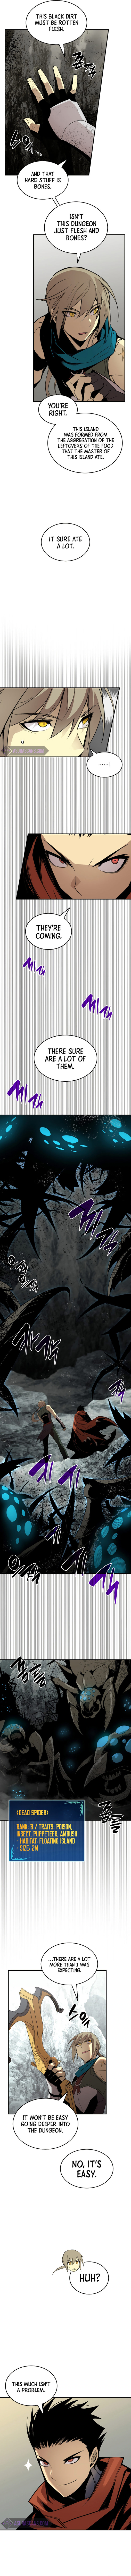 Worn and Torn Newbie - Chapter 88 Page 4